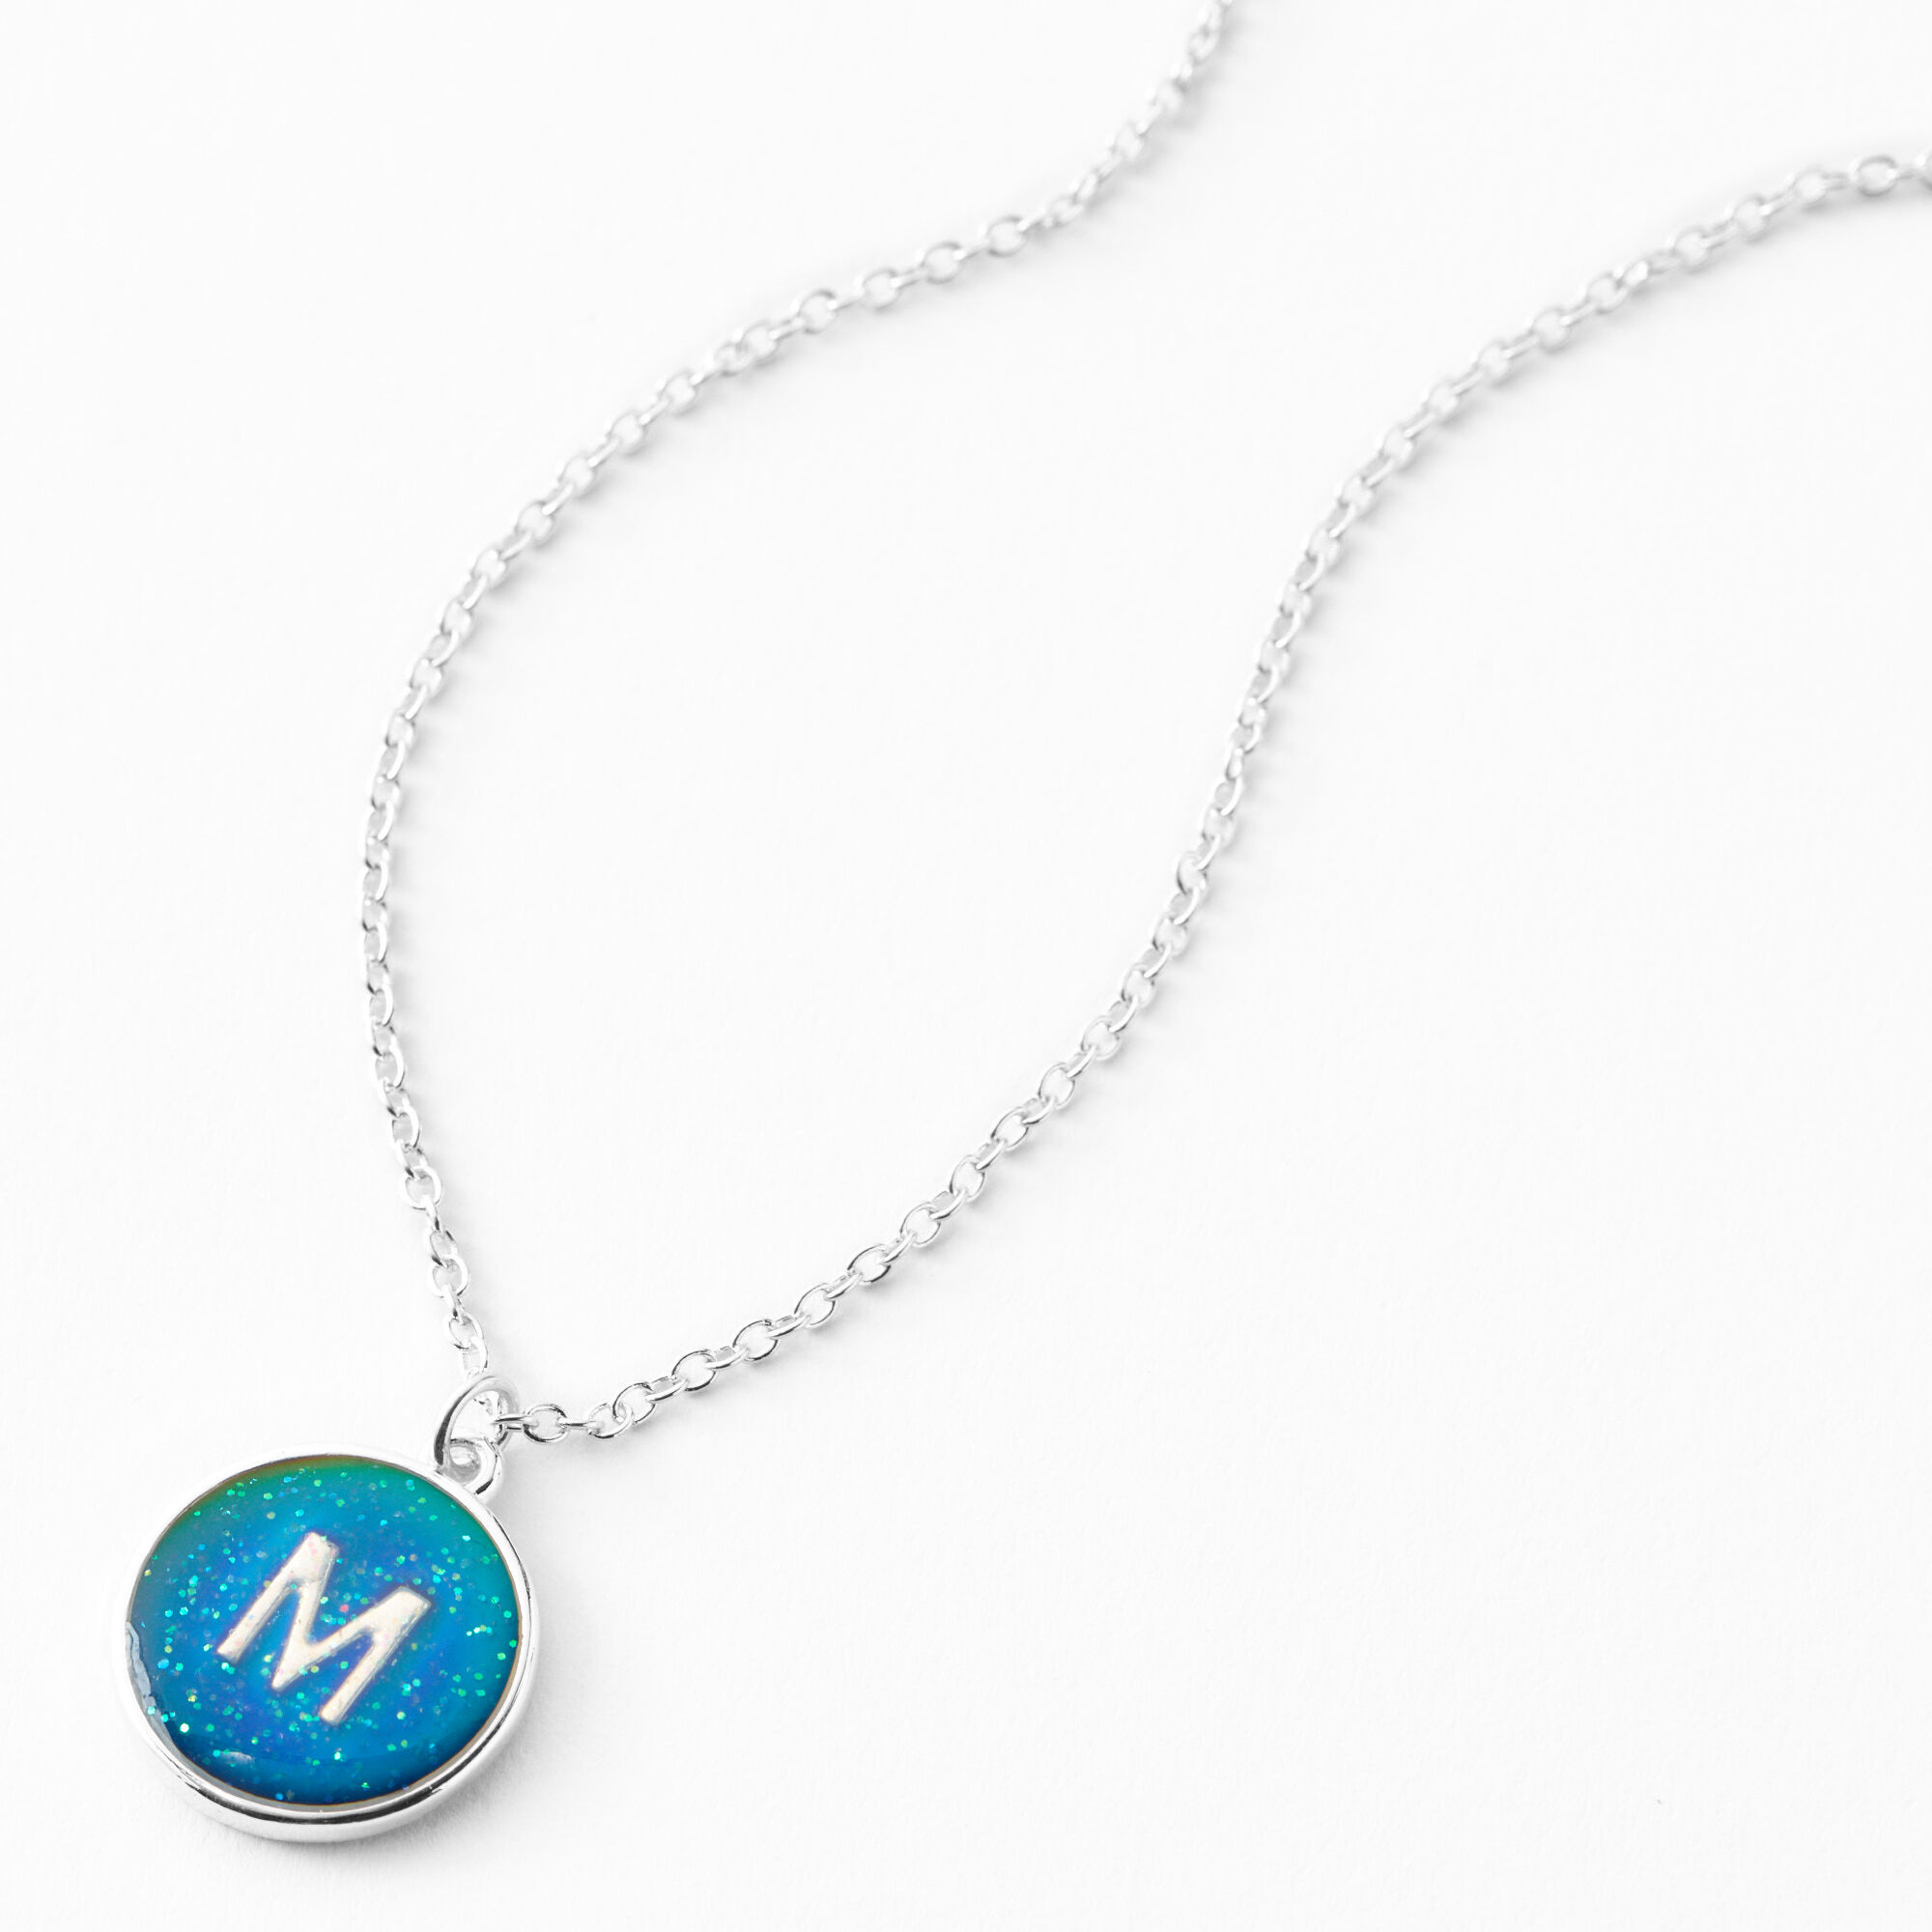 Ms.Iconic Sterling Silver Necklaces for Women | Mood Necklaces | Timeless  Design for Every Occasion